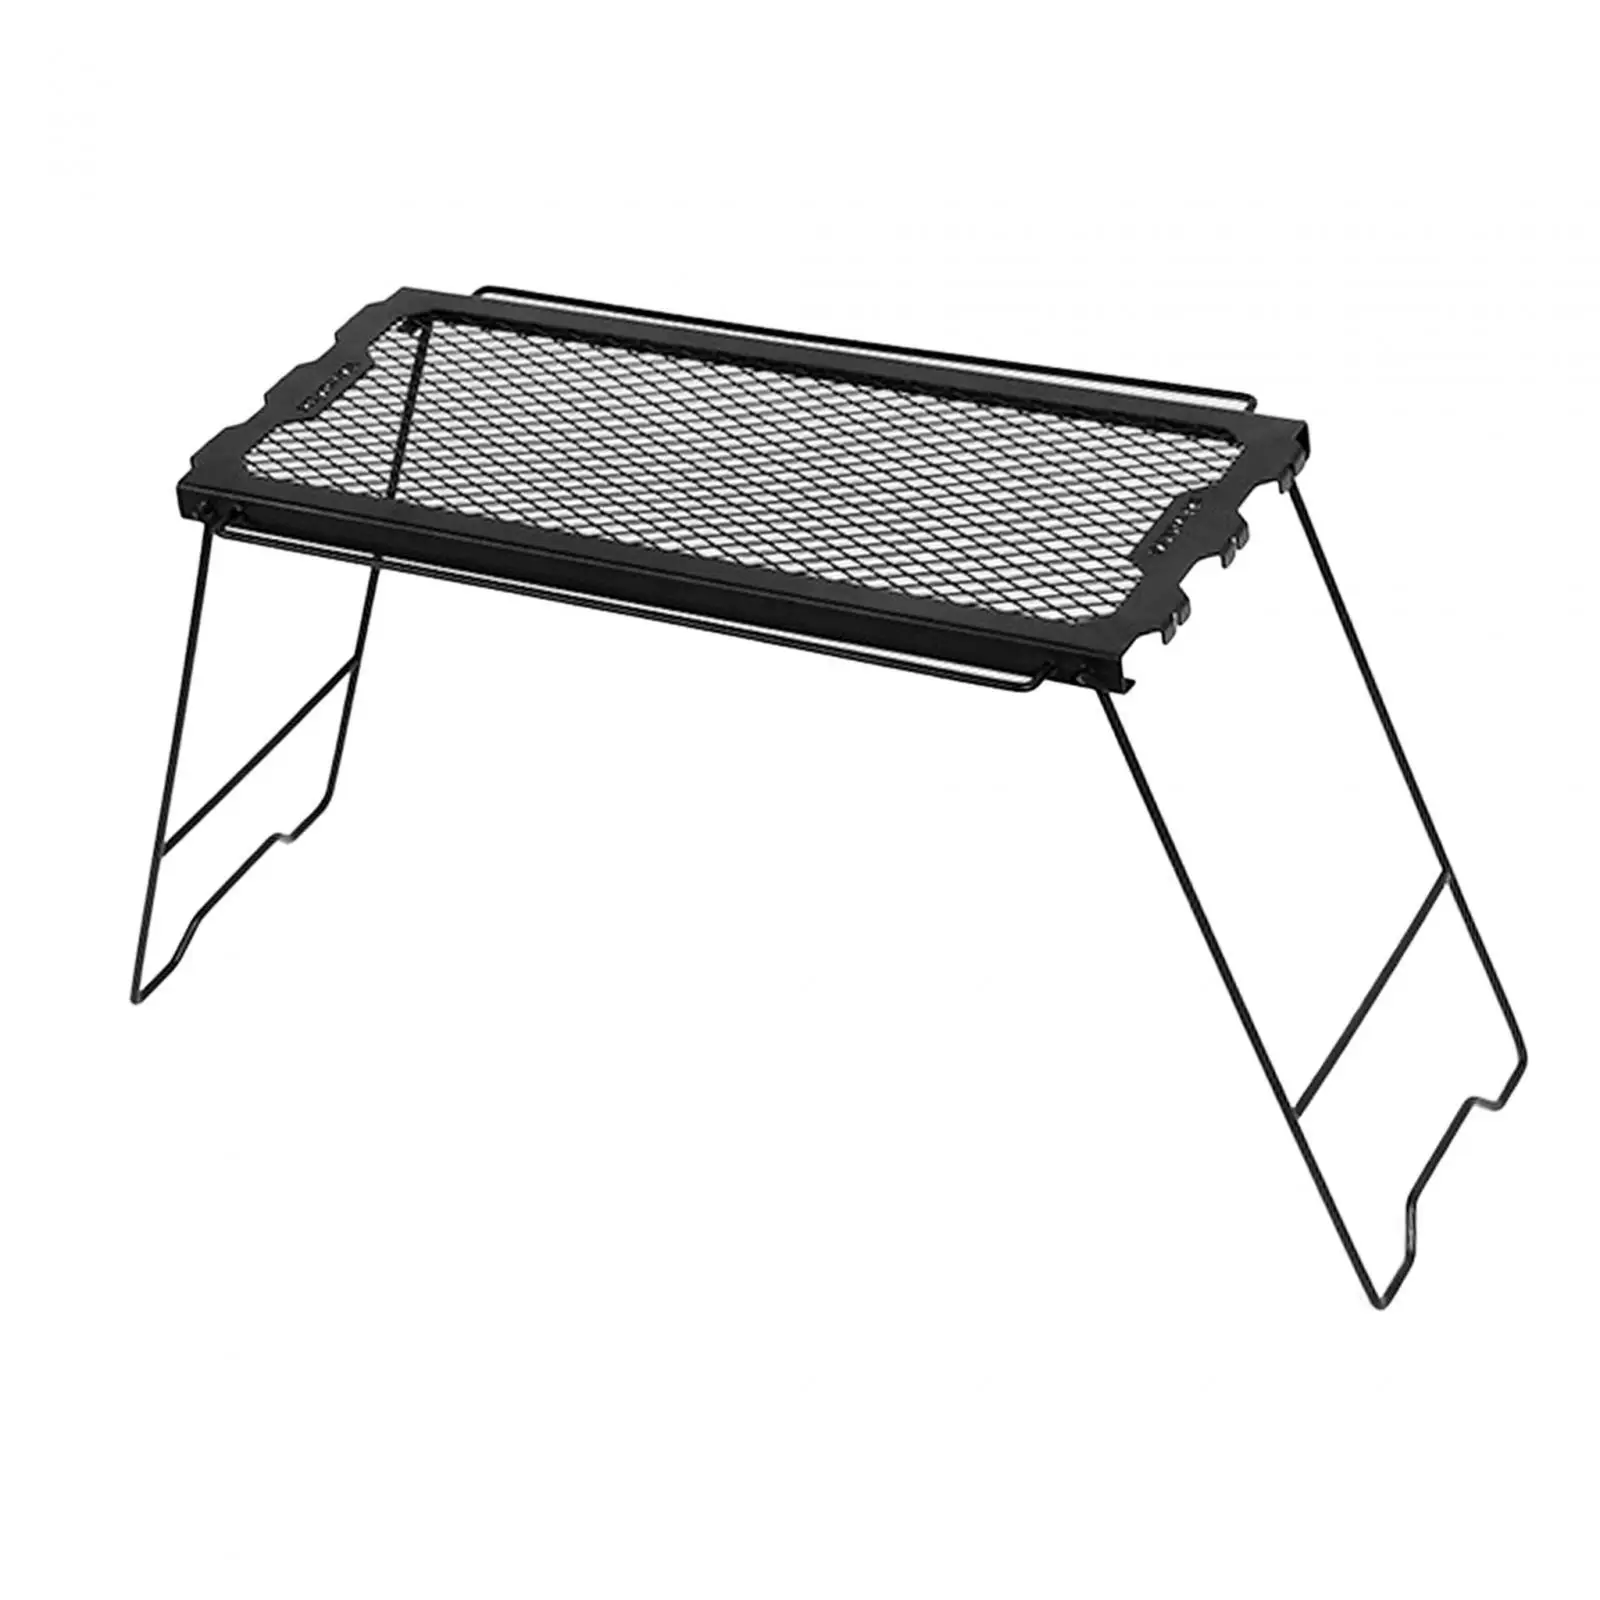 Folding Camping Table, Foldable Campfire Grill with Mesh Desktop, Compact Camping Cooking Grate over Fire for Hiking, BBQ